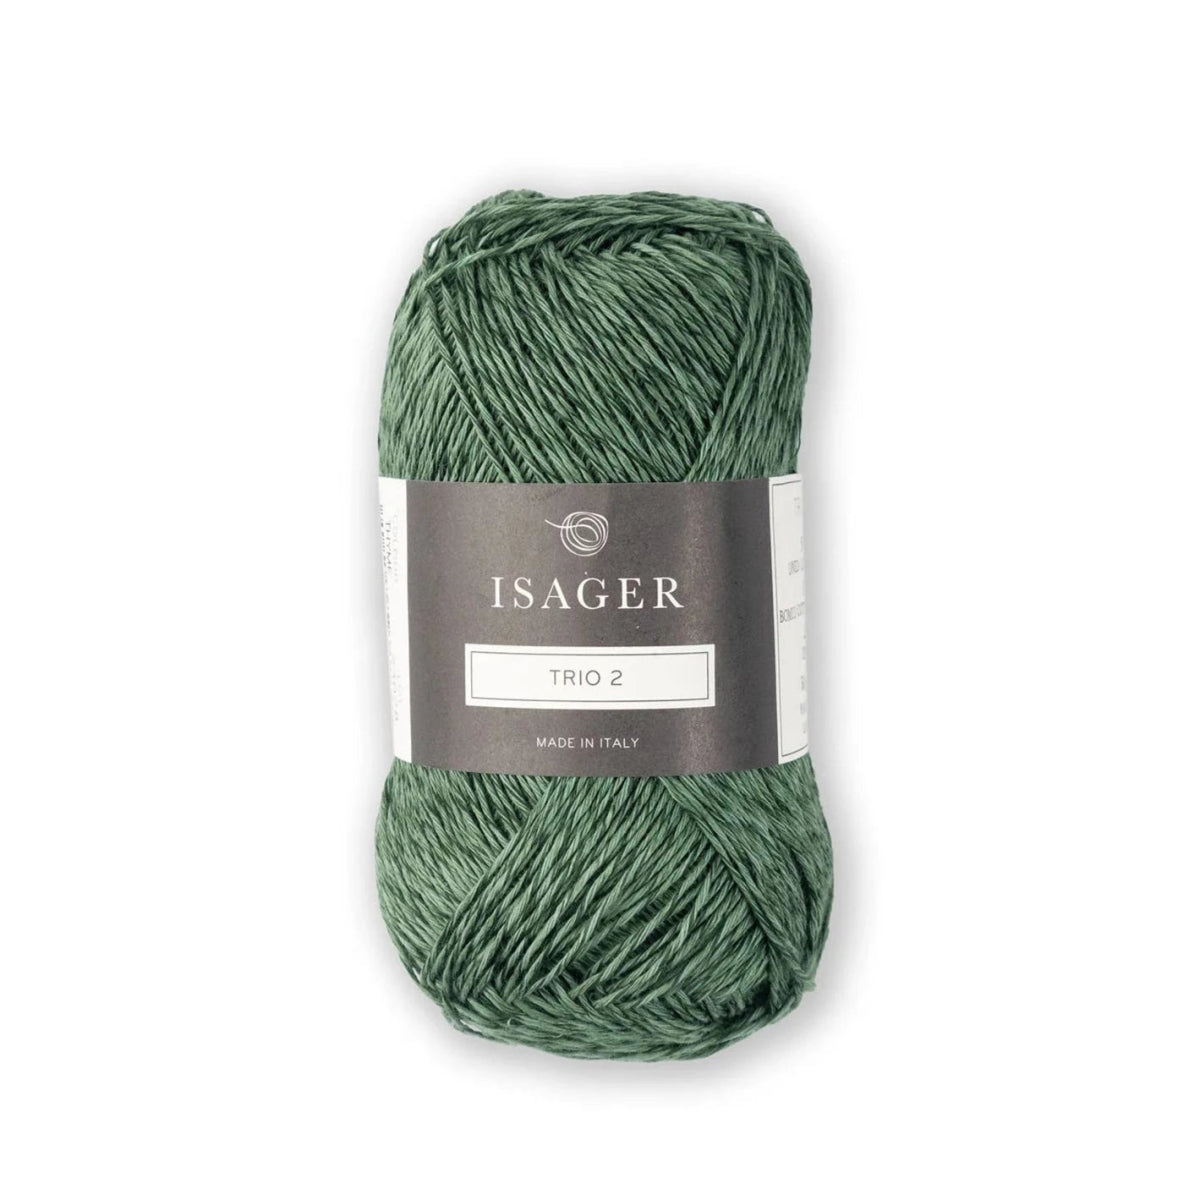 Isager Trio 2 - Thyme - 5 Ply - Cotton - The Little Yarn Store